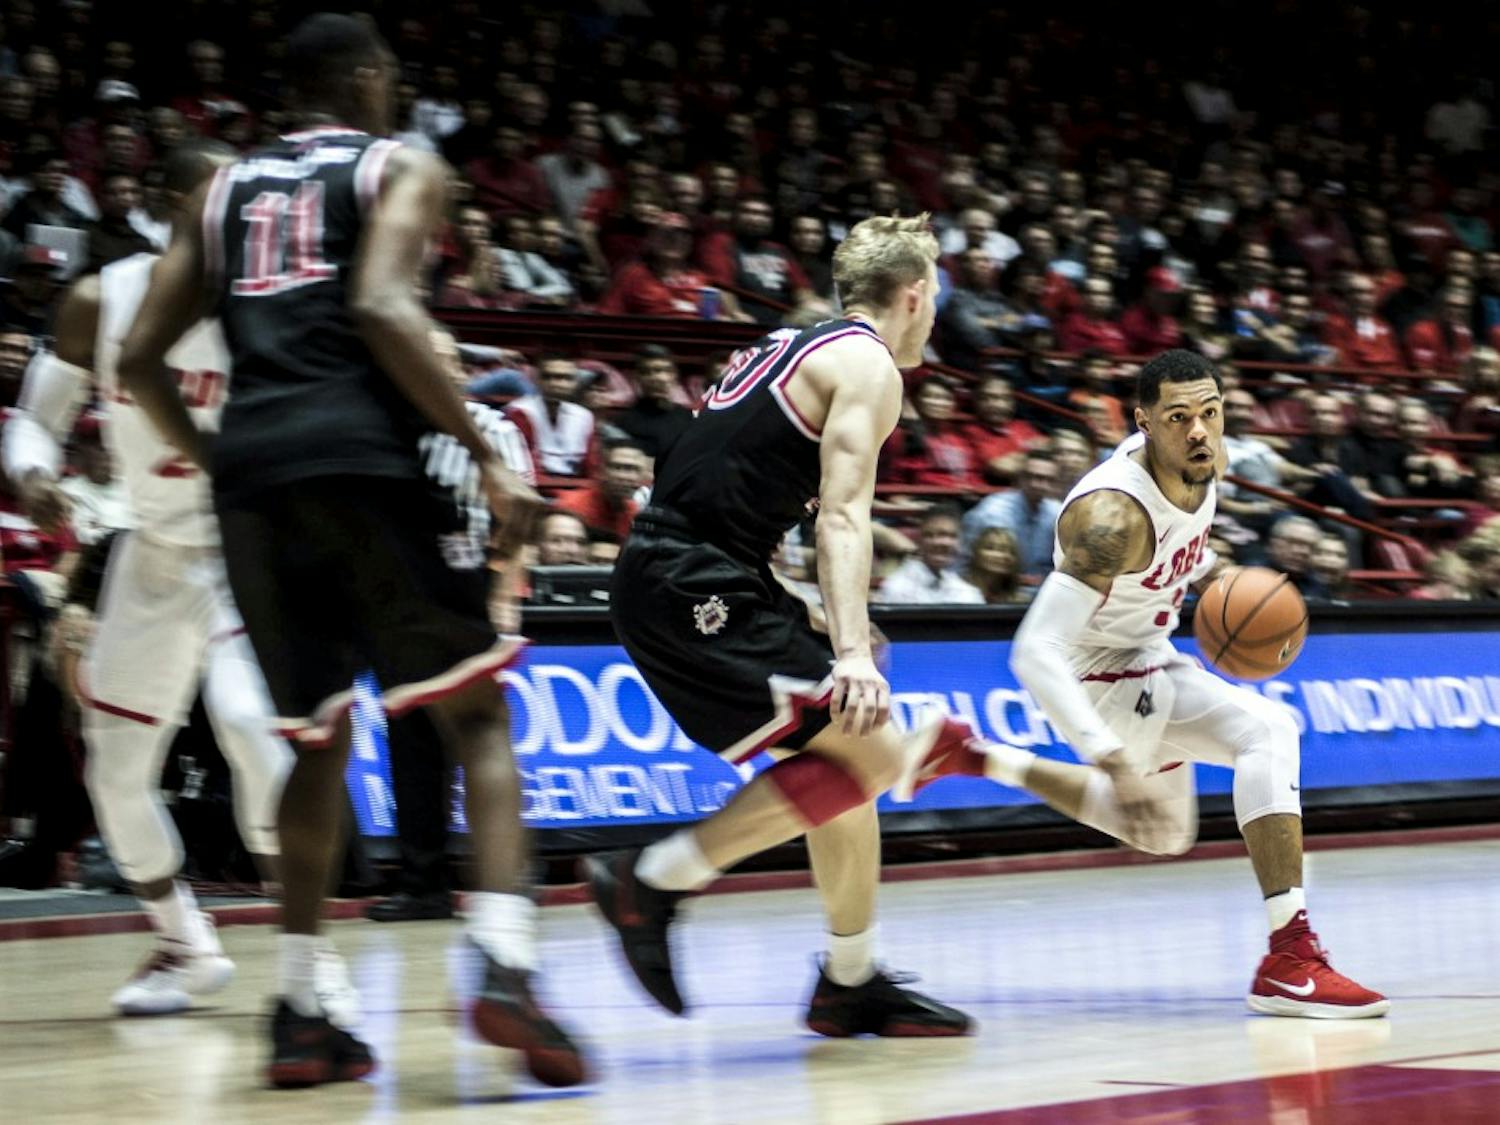 Troy Simons drives past Fresno State's Sam Bittner during Saturday's game at Dreamstyle Arena, aka&nbsp;The Pit. The Lobos won 95-86 in overtime.